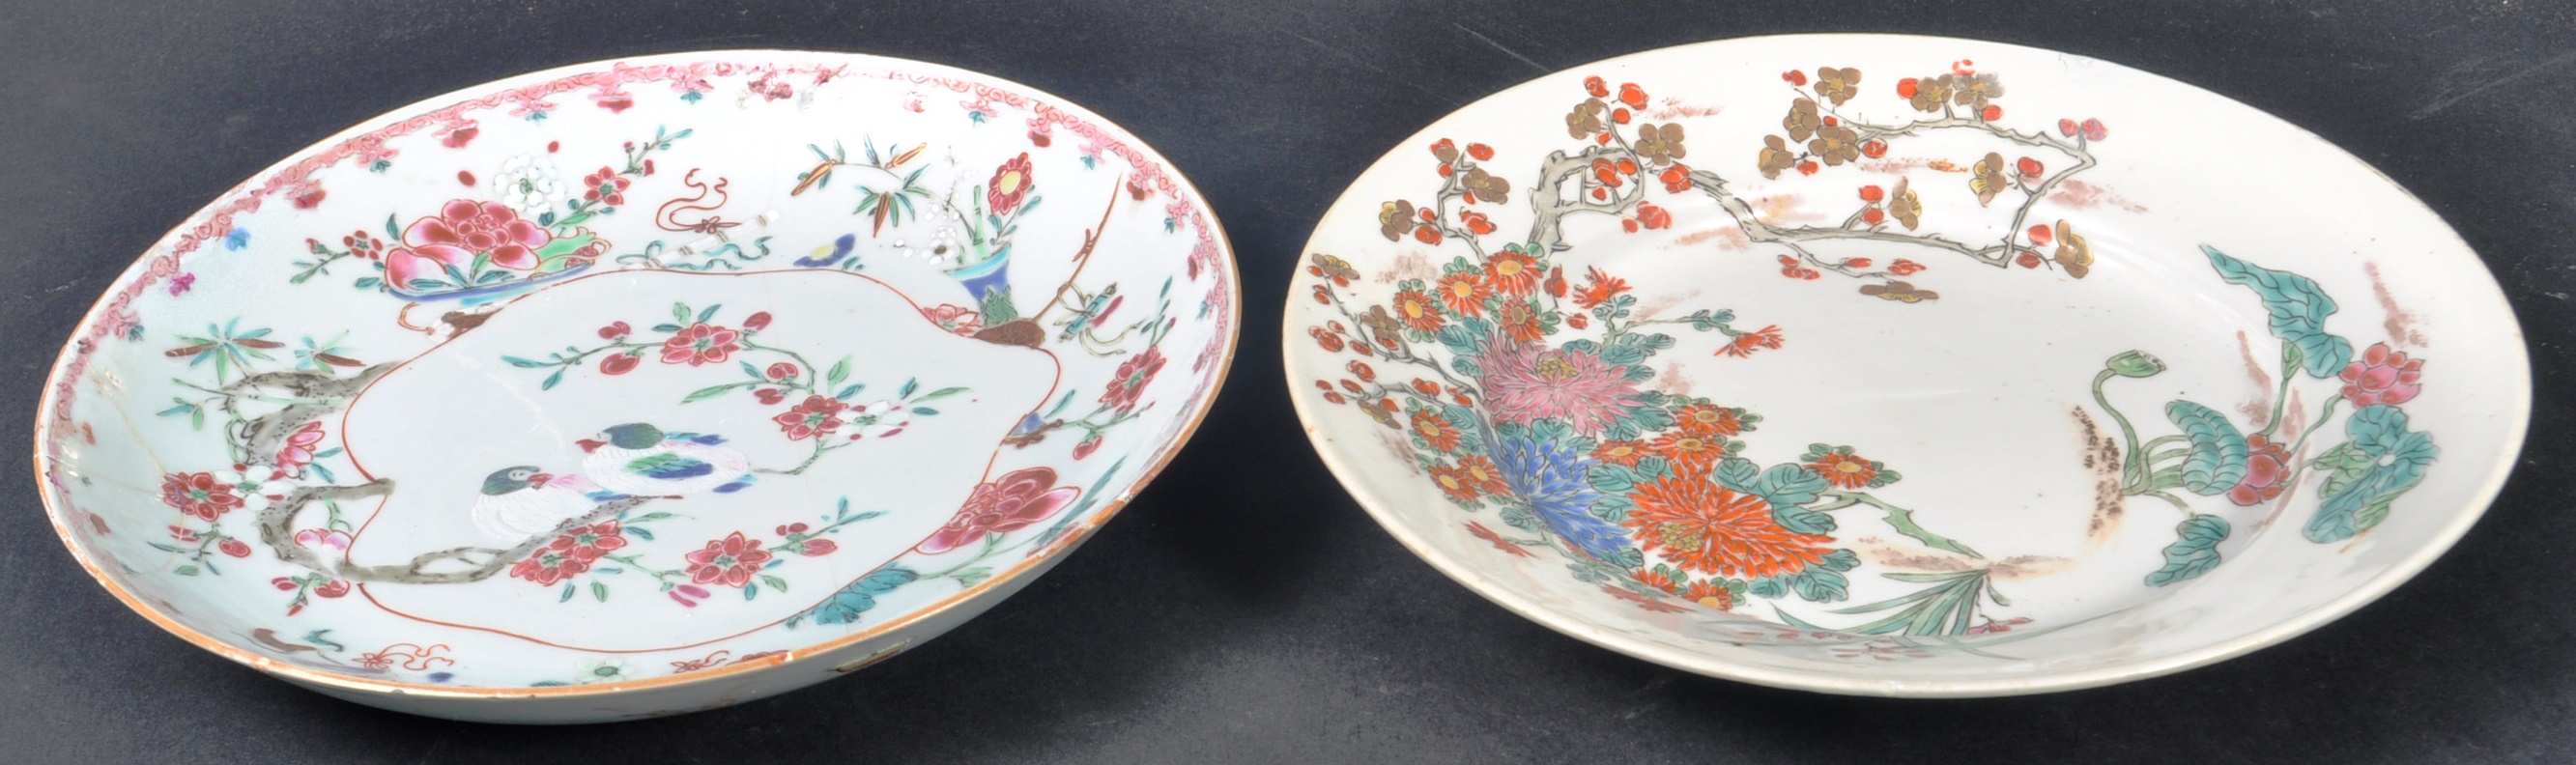 TWO 18TH CENTURY CHINESE QIANLONG PORCELAIN PLATES - Image 2 of 11